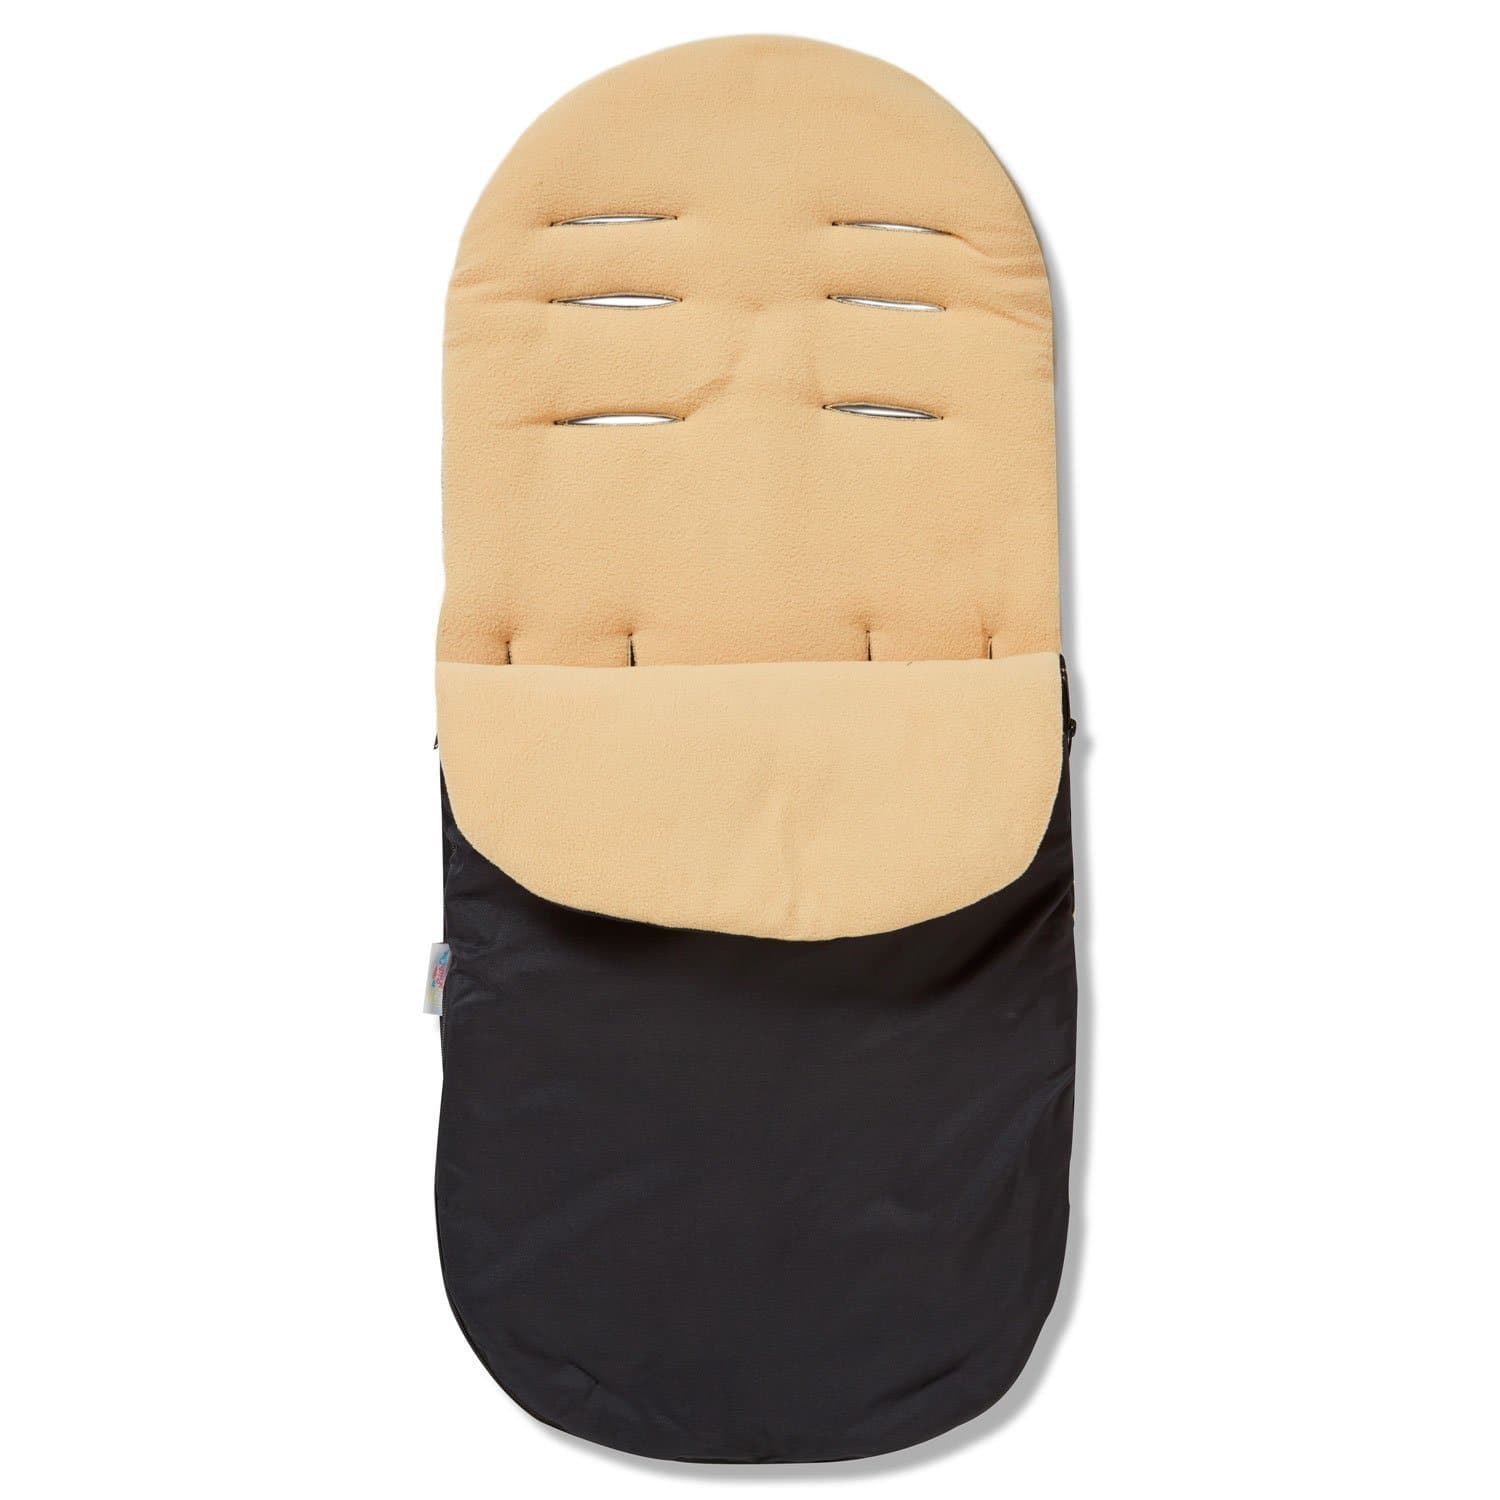 Footmuff / Cosy Toes Compatible with Excel - For Your Little One